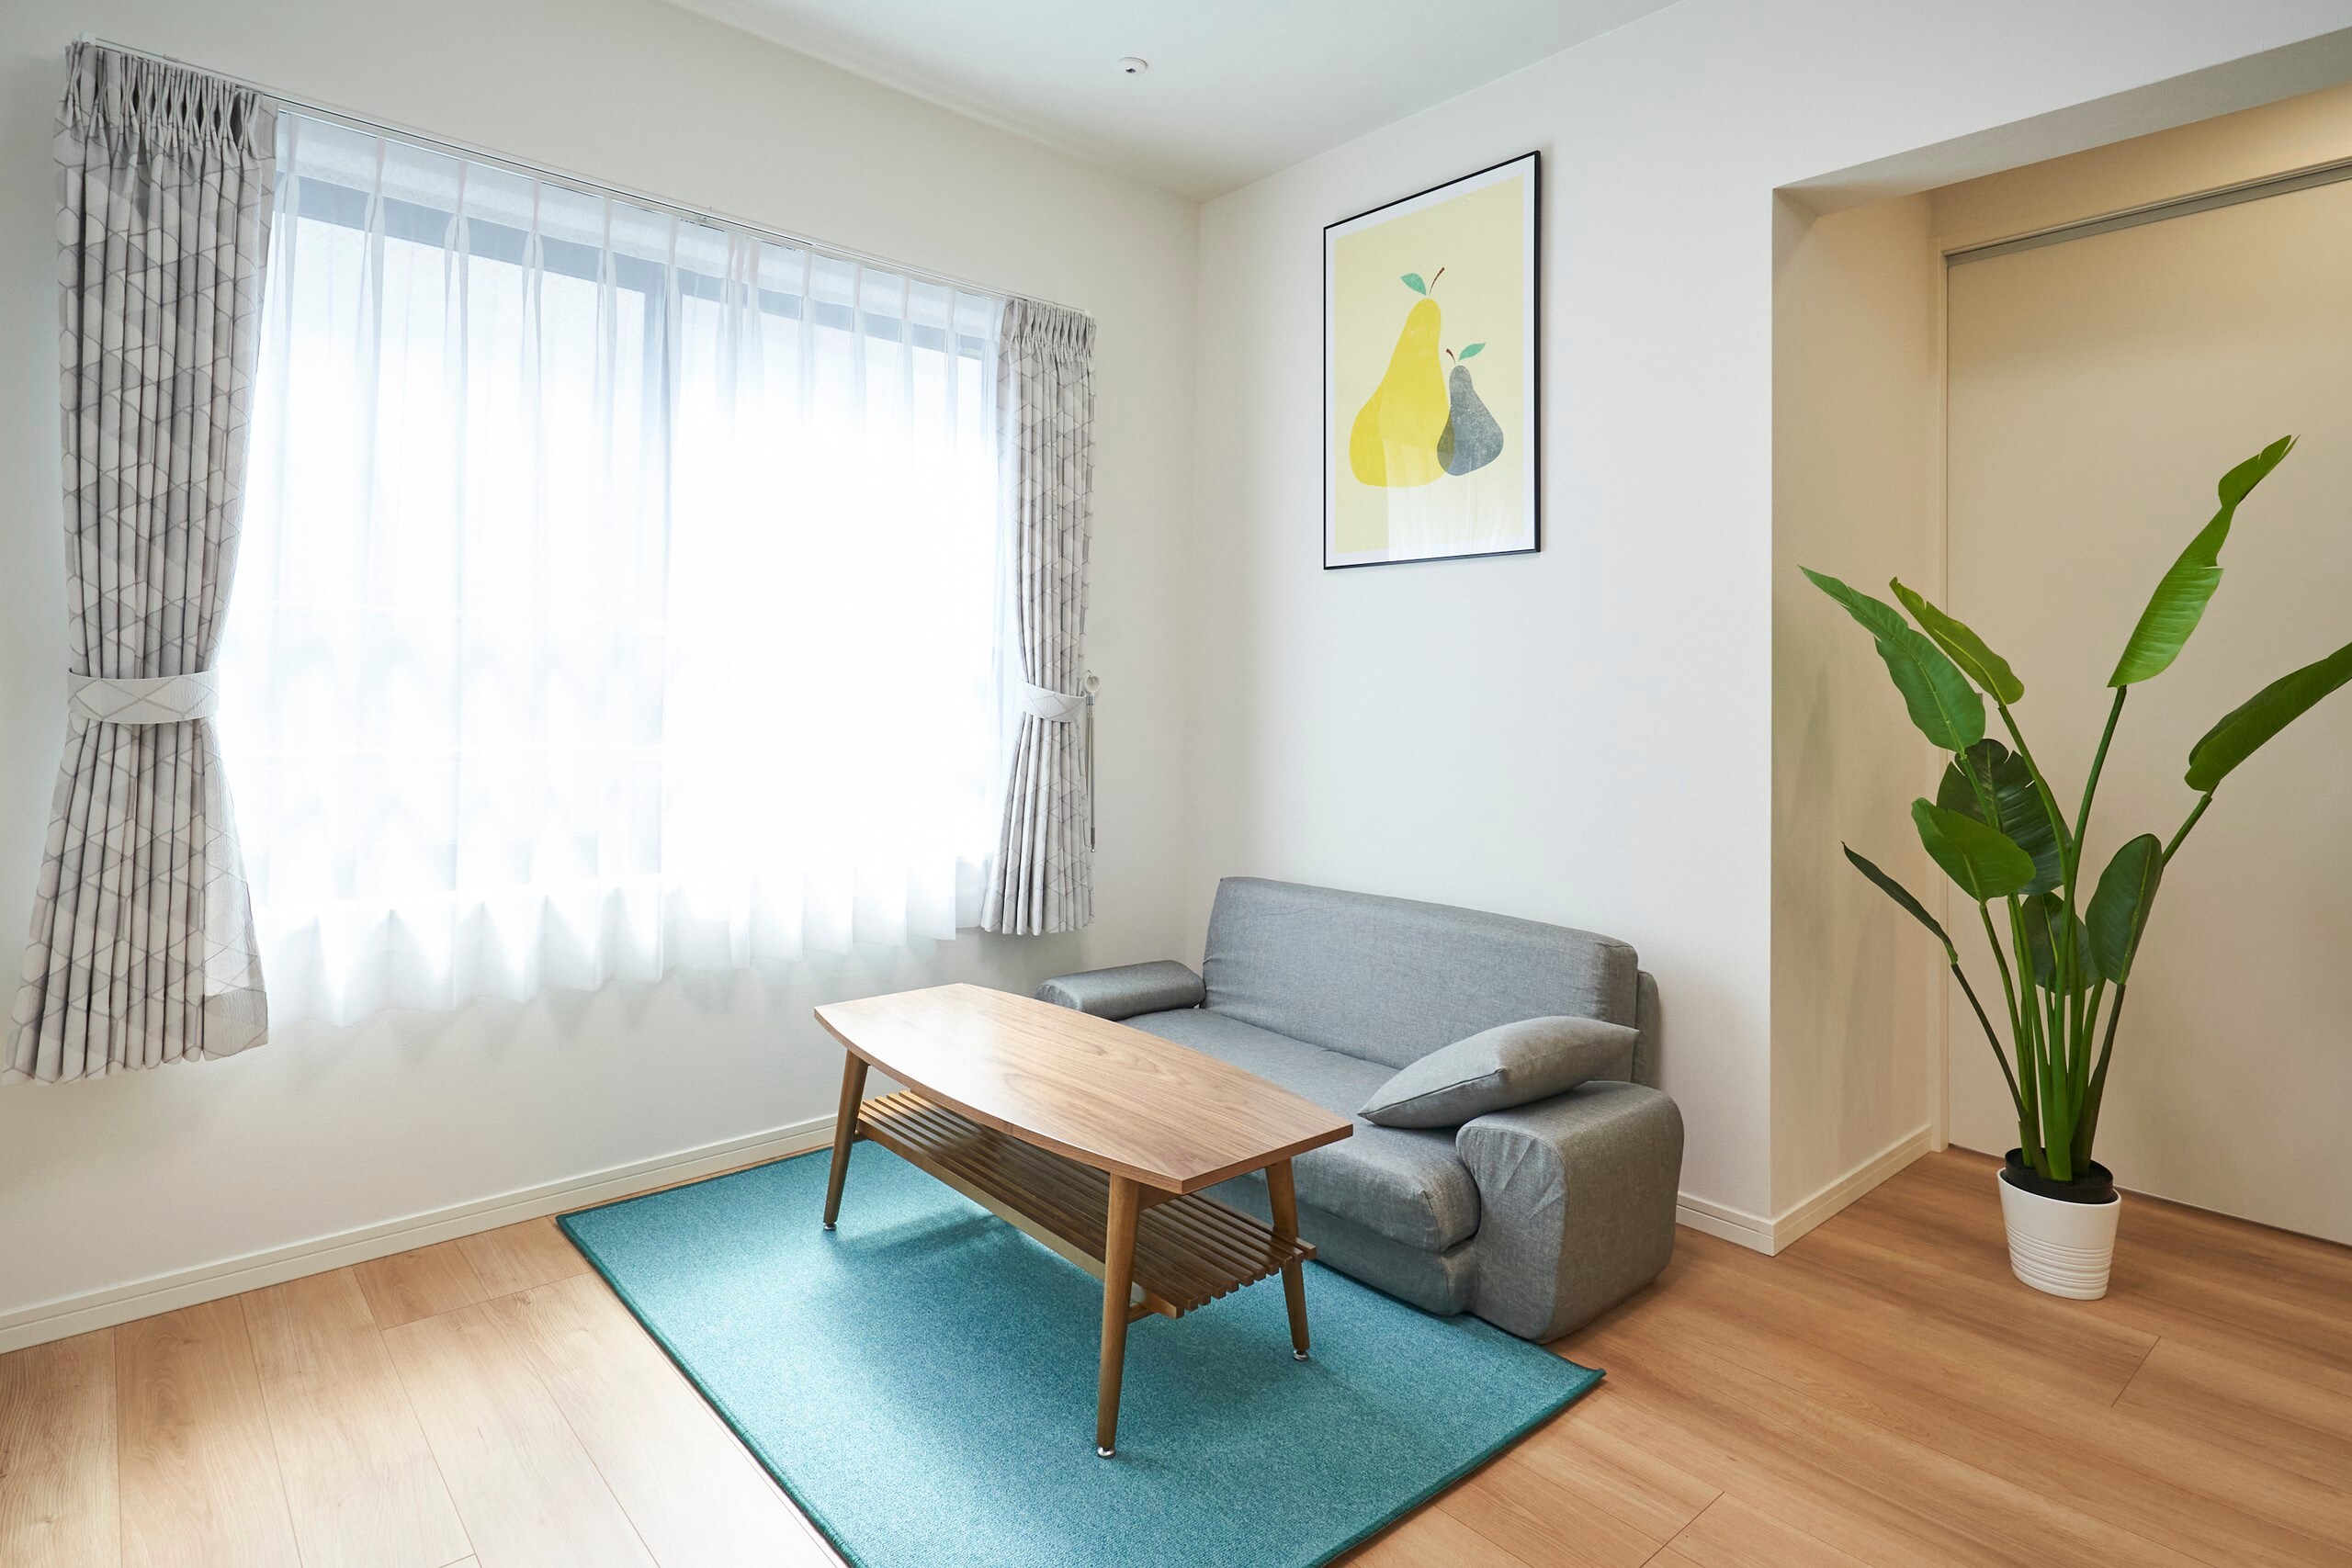 Property Image 2 - Convenience 2 Bedroom Apartment just 5 minutes walk from Sugamo station 